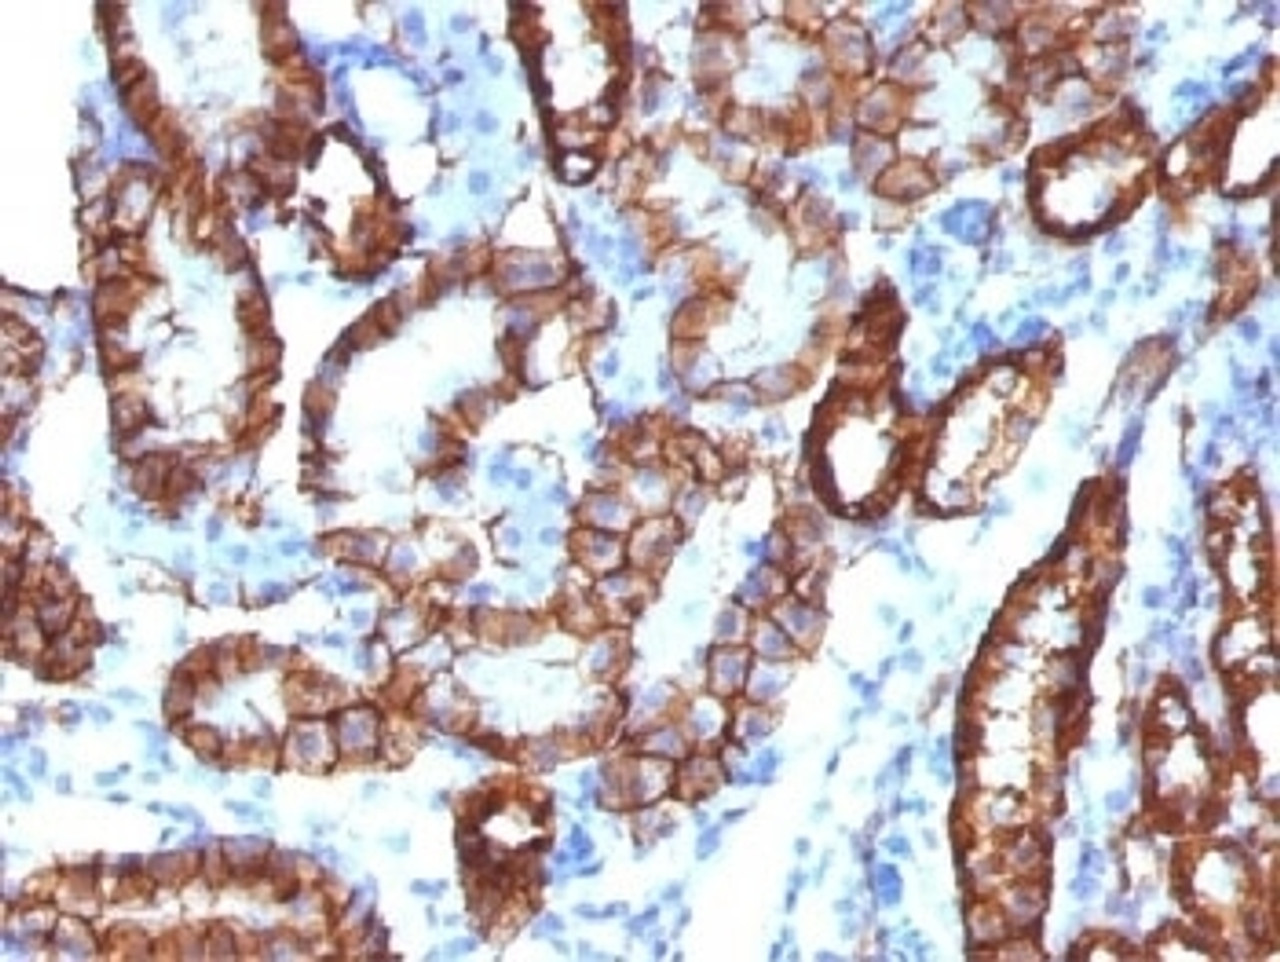 IHC testing of FFPE mouse kidney tissue with recombinant Cadherin 16 antibody (clone CDH16/1532R) . Required HIER: steam sections in 10mM Tris with 1mM EDTA, pH 9.0, for 10-20 min.